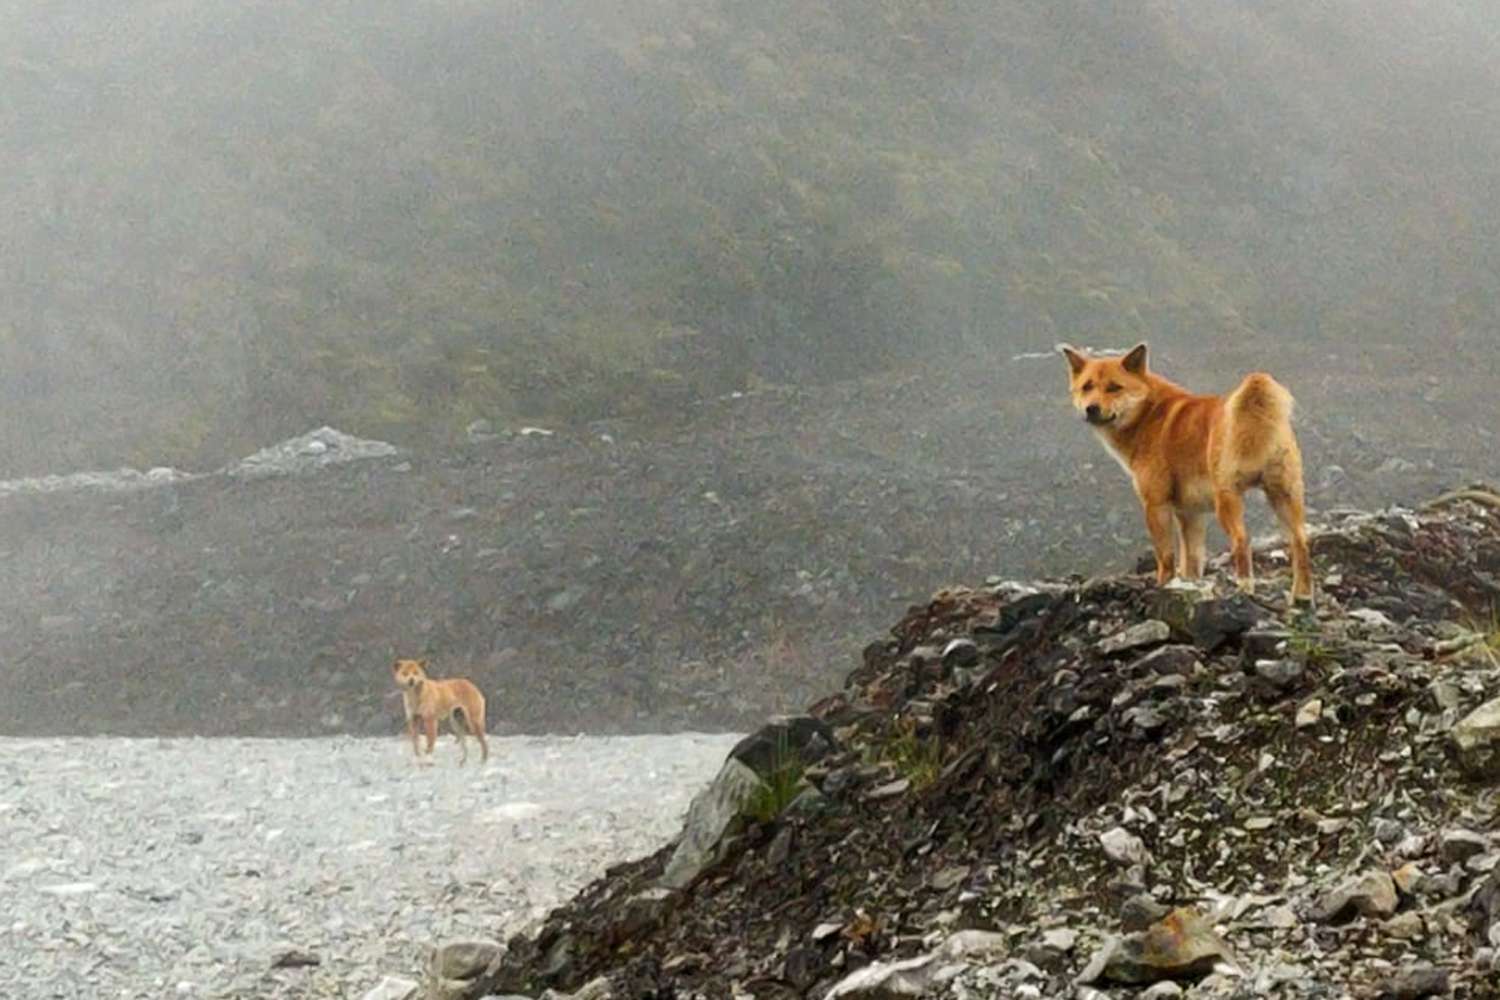 A rare singing dog that was thought to be extinct in wild for 50 years and how it has been found